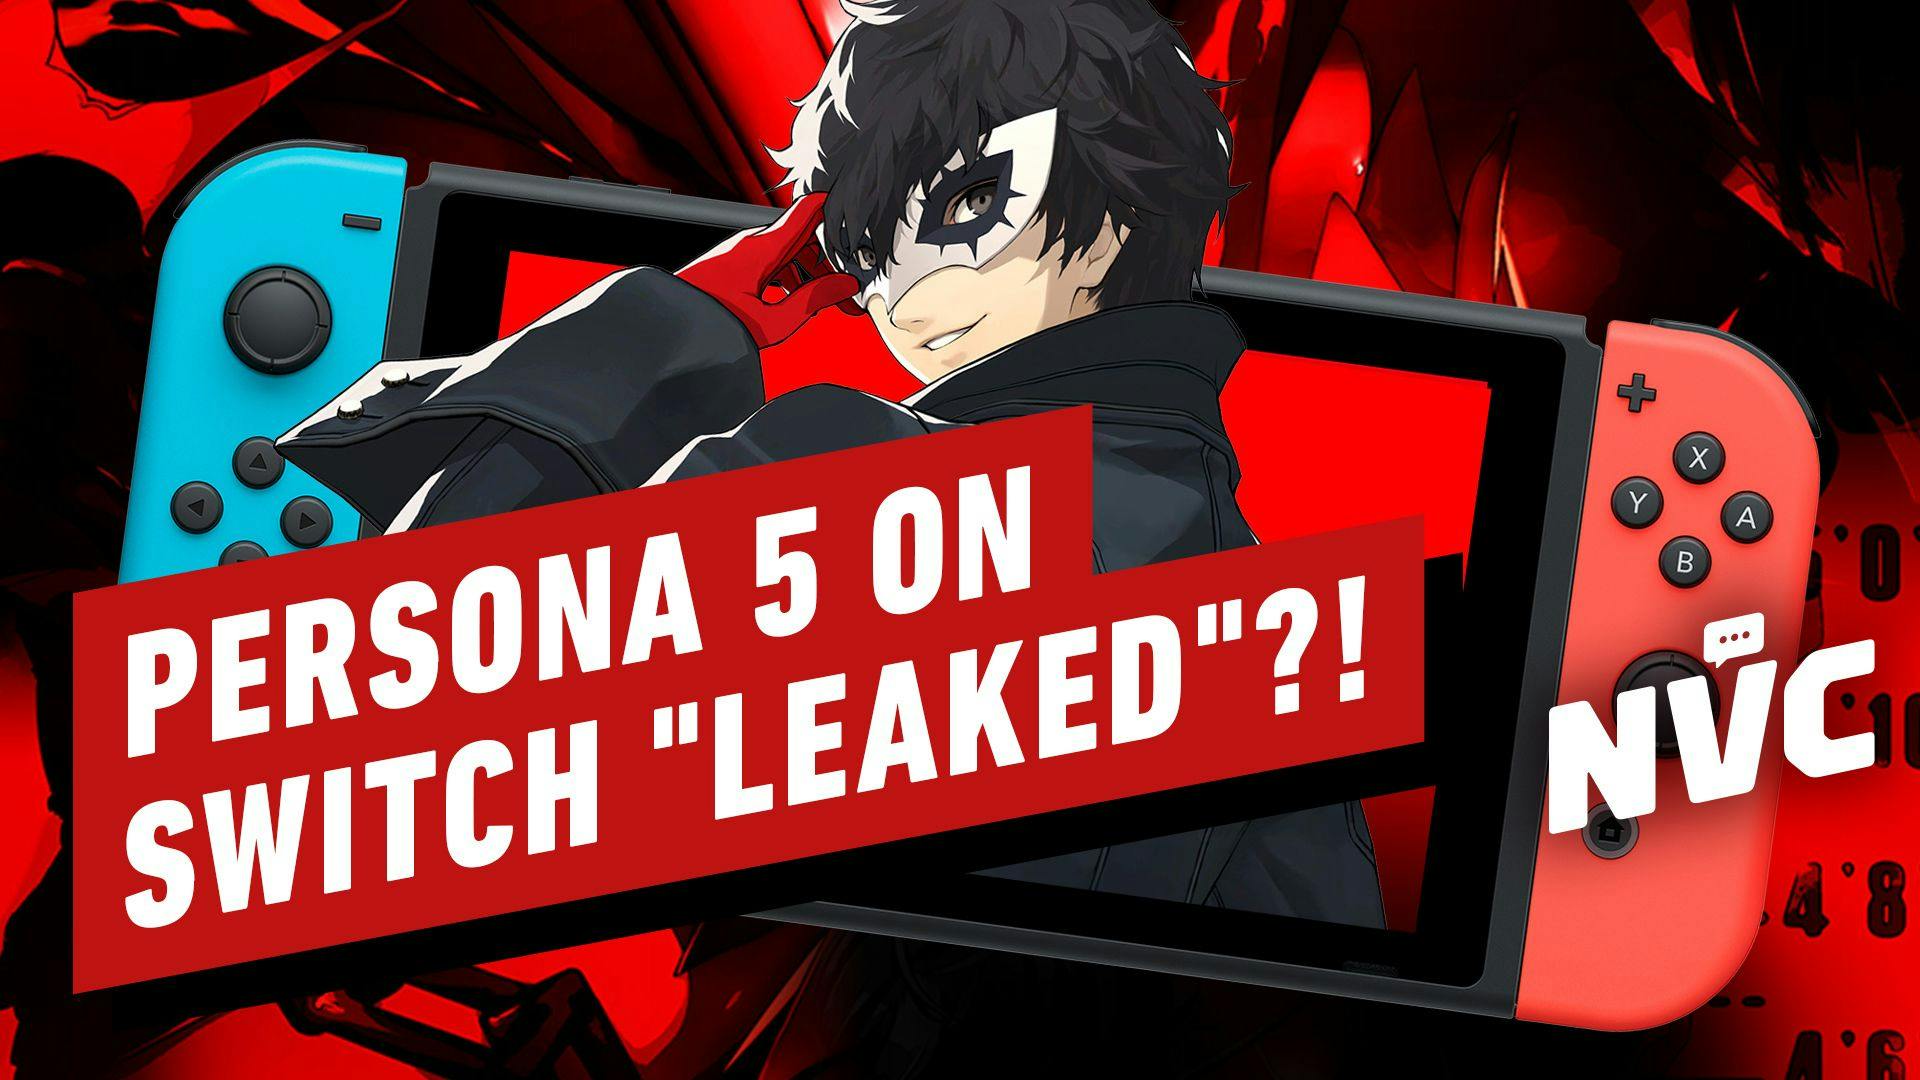 Let's Talk About That Persona 5 